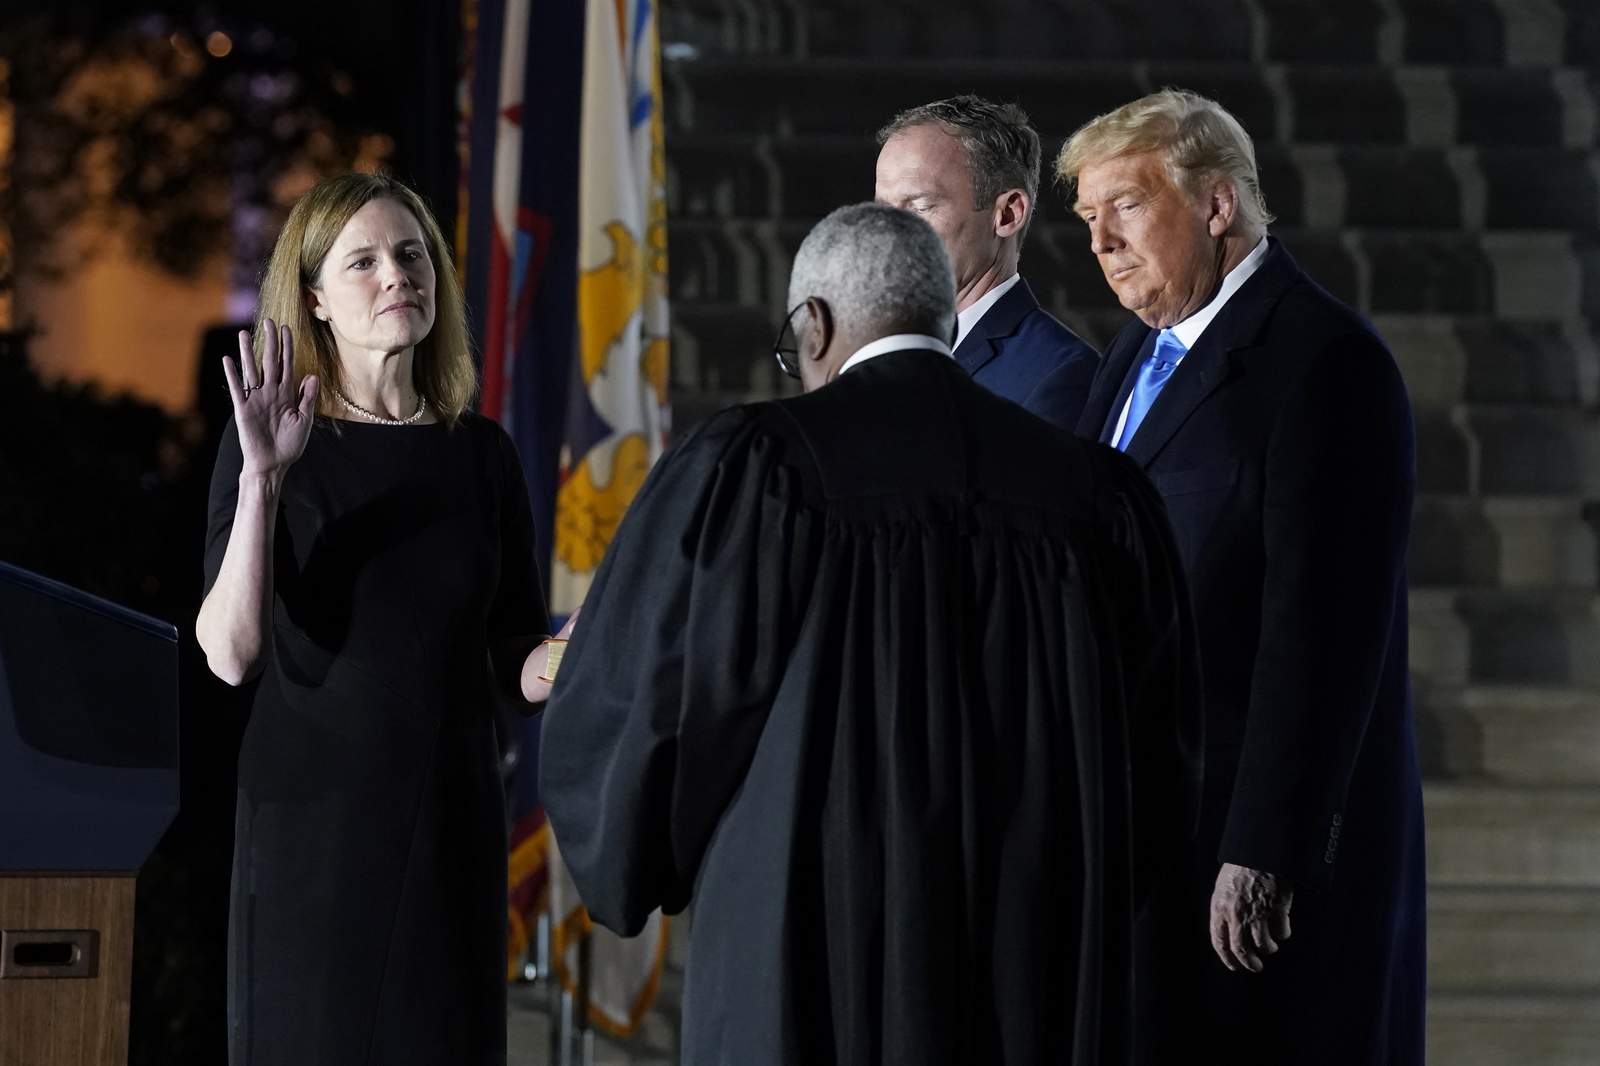 Amy Coney Barrett confirmed to Supreme Court